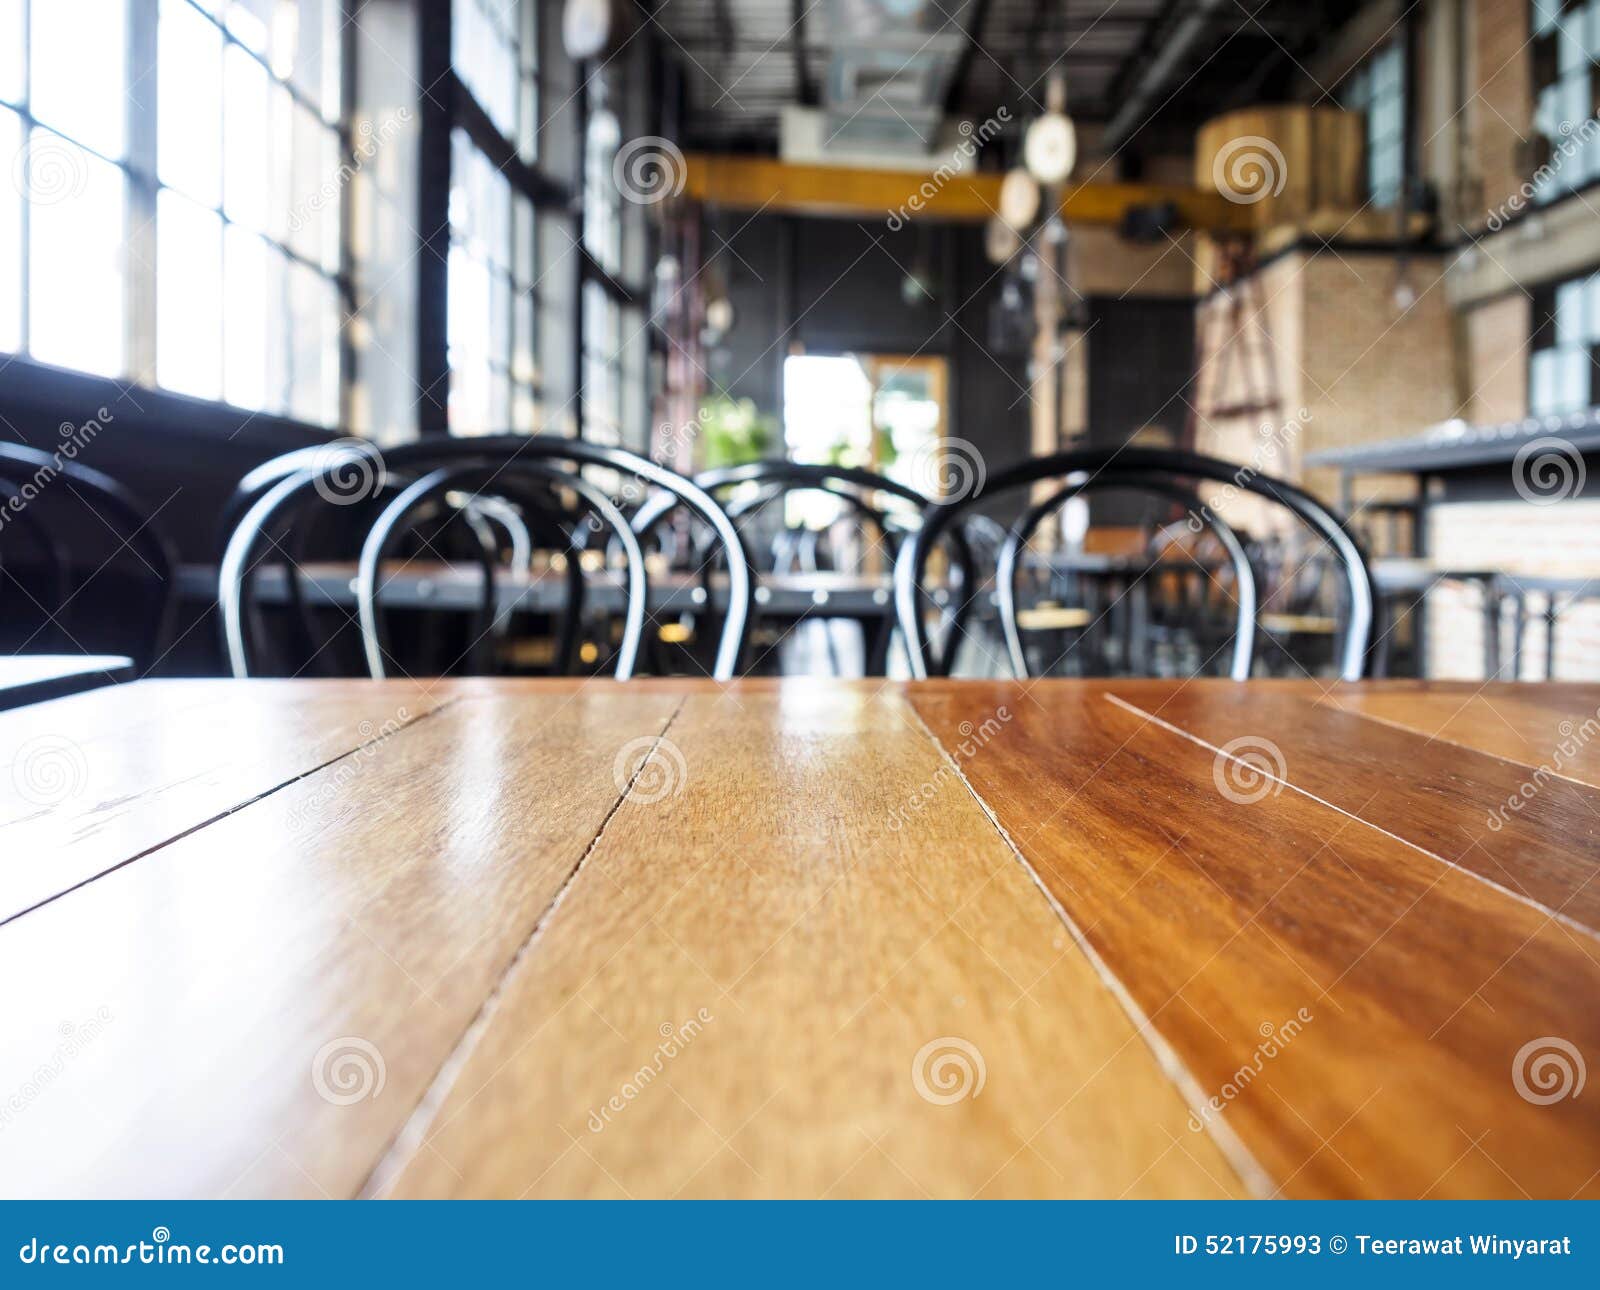 Top of Wooden Table and Chairs with Restaurant Interior Background Stock  Image - Image of bottle, night: 52175993